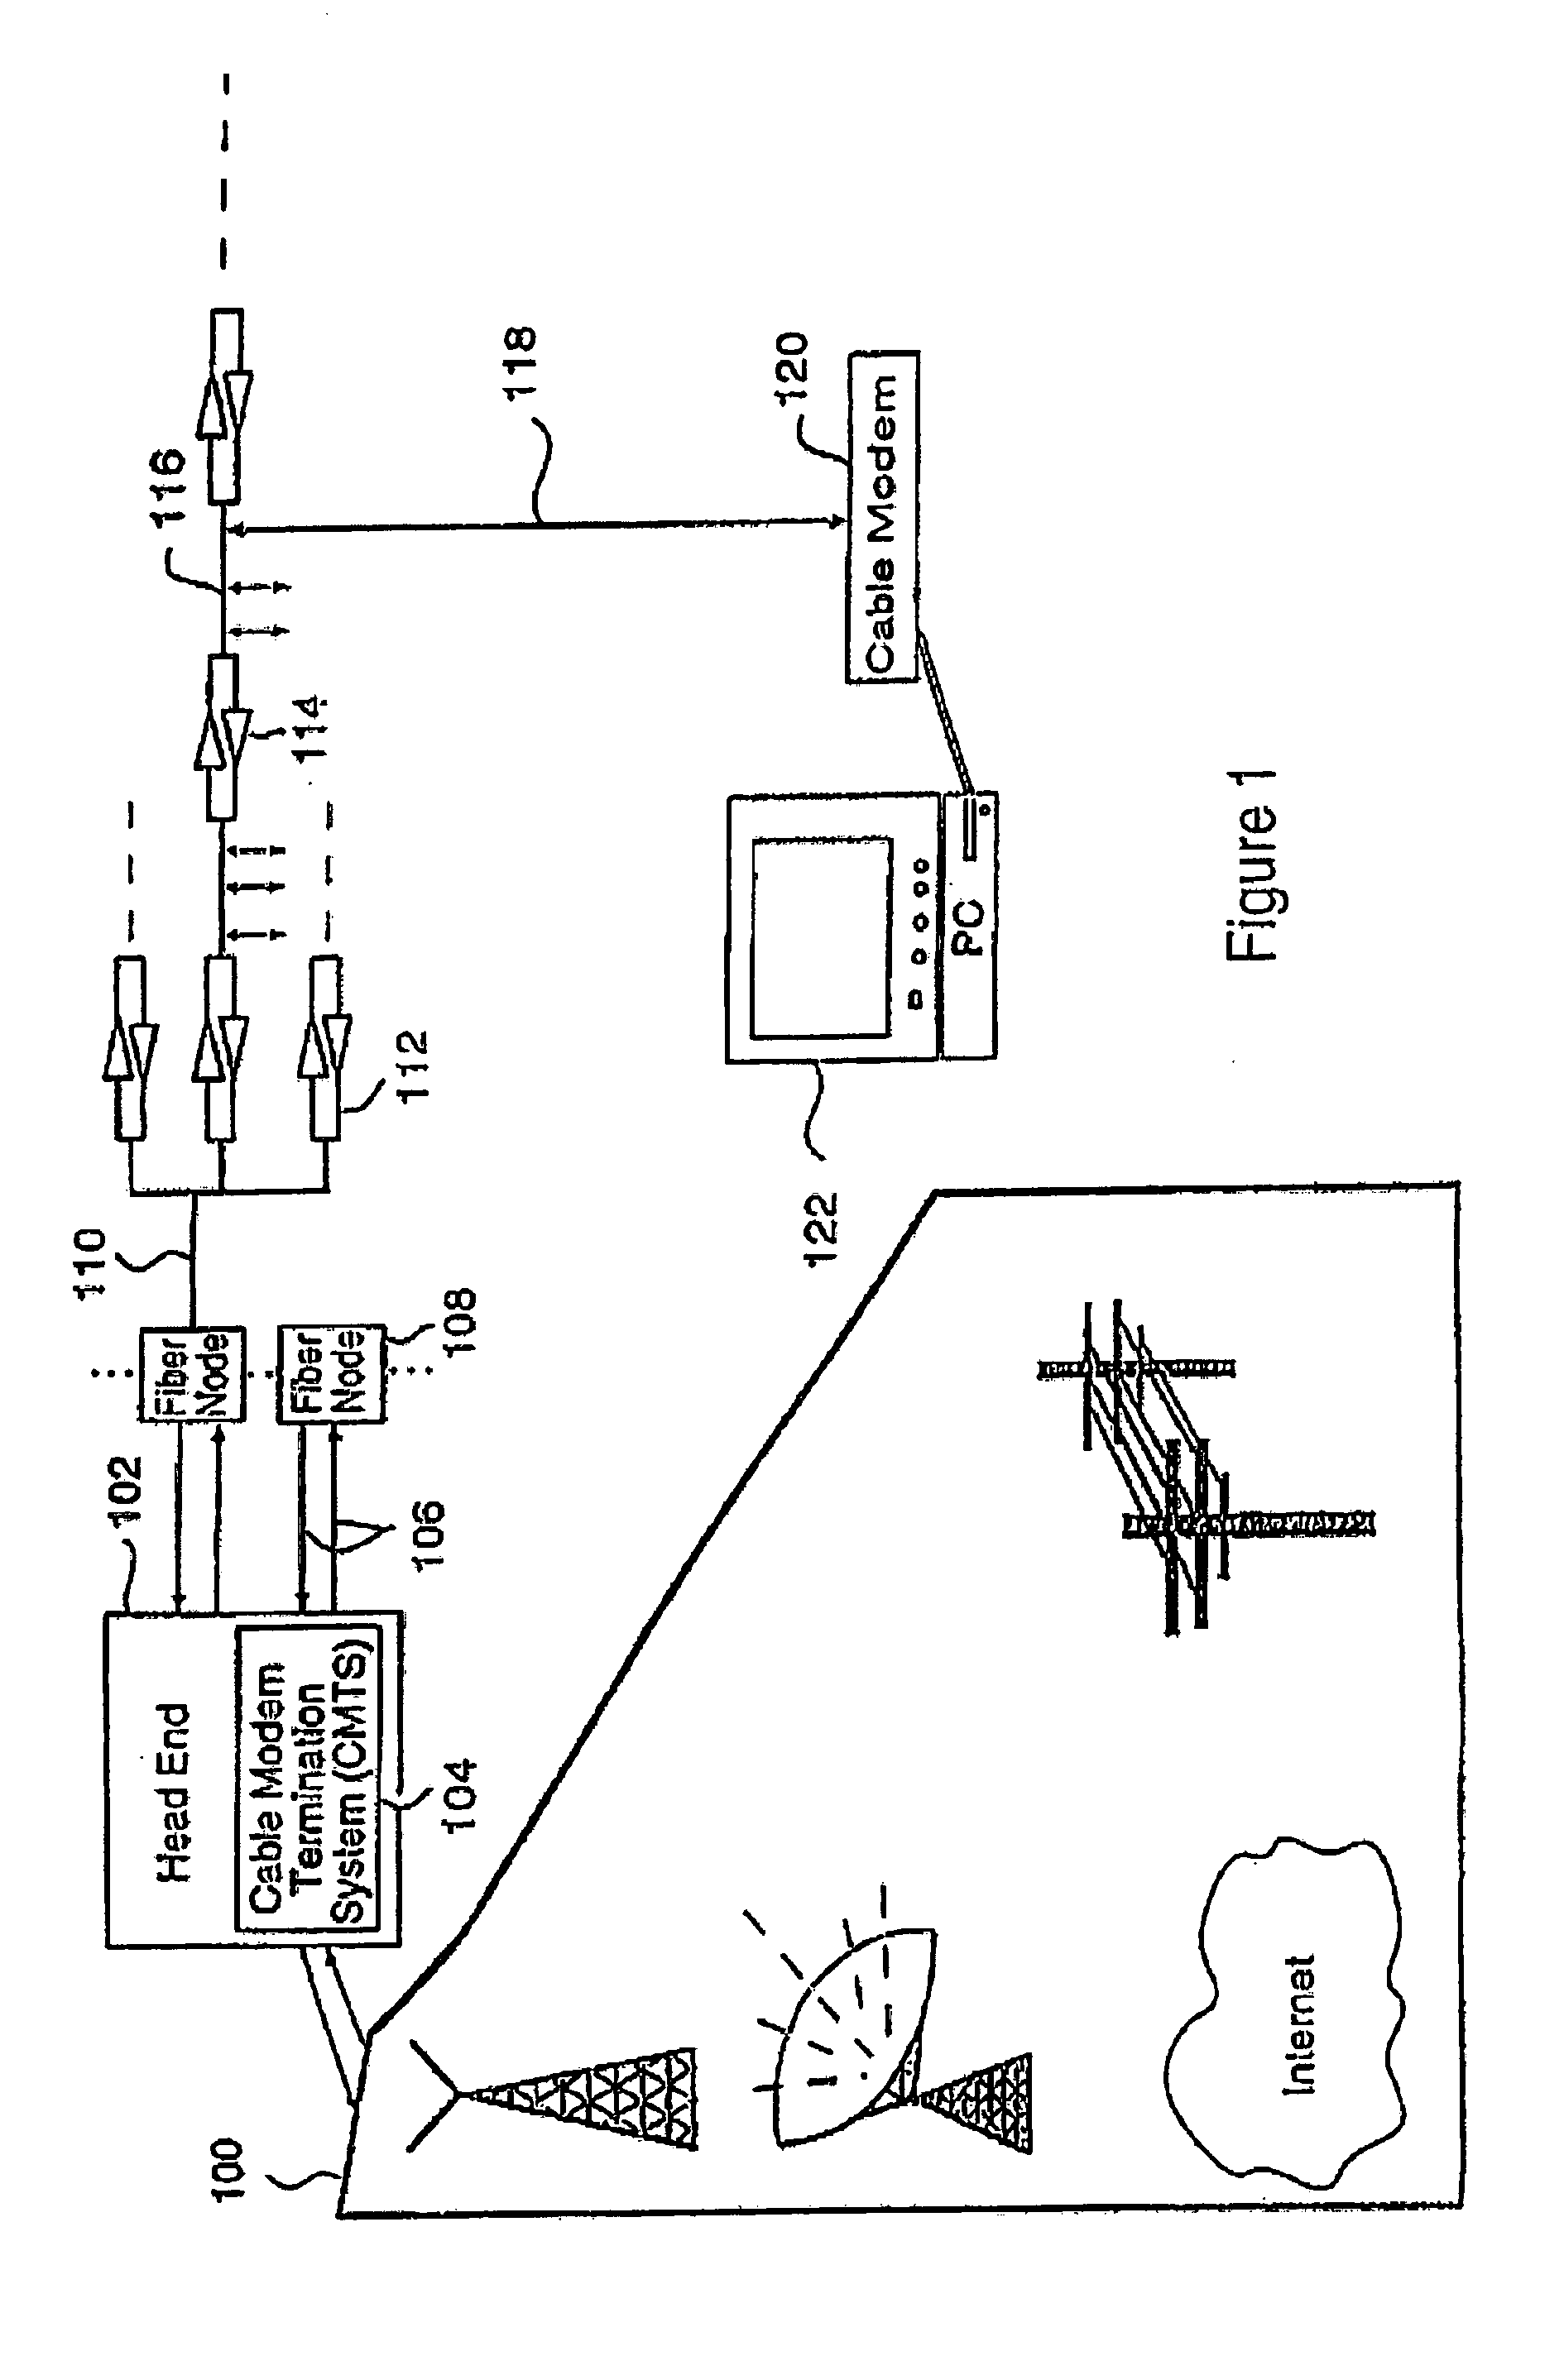 Dynamic modulation of modulation profiles for communication channels in an access network